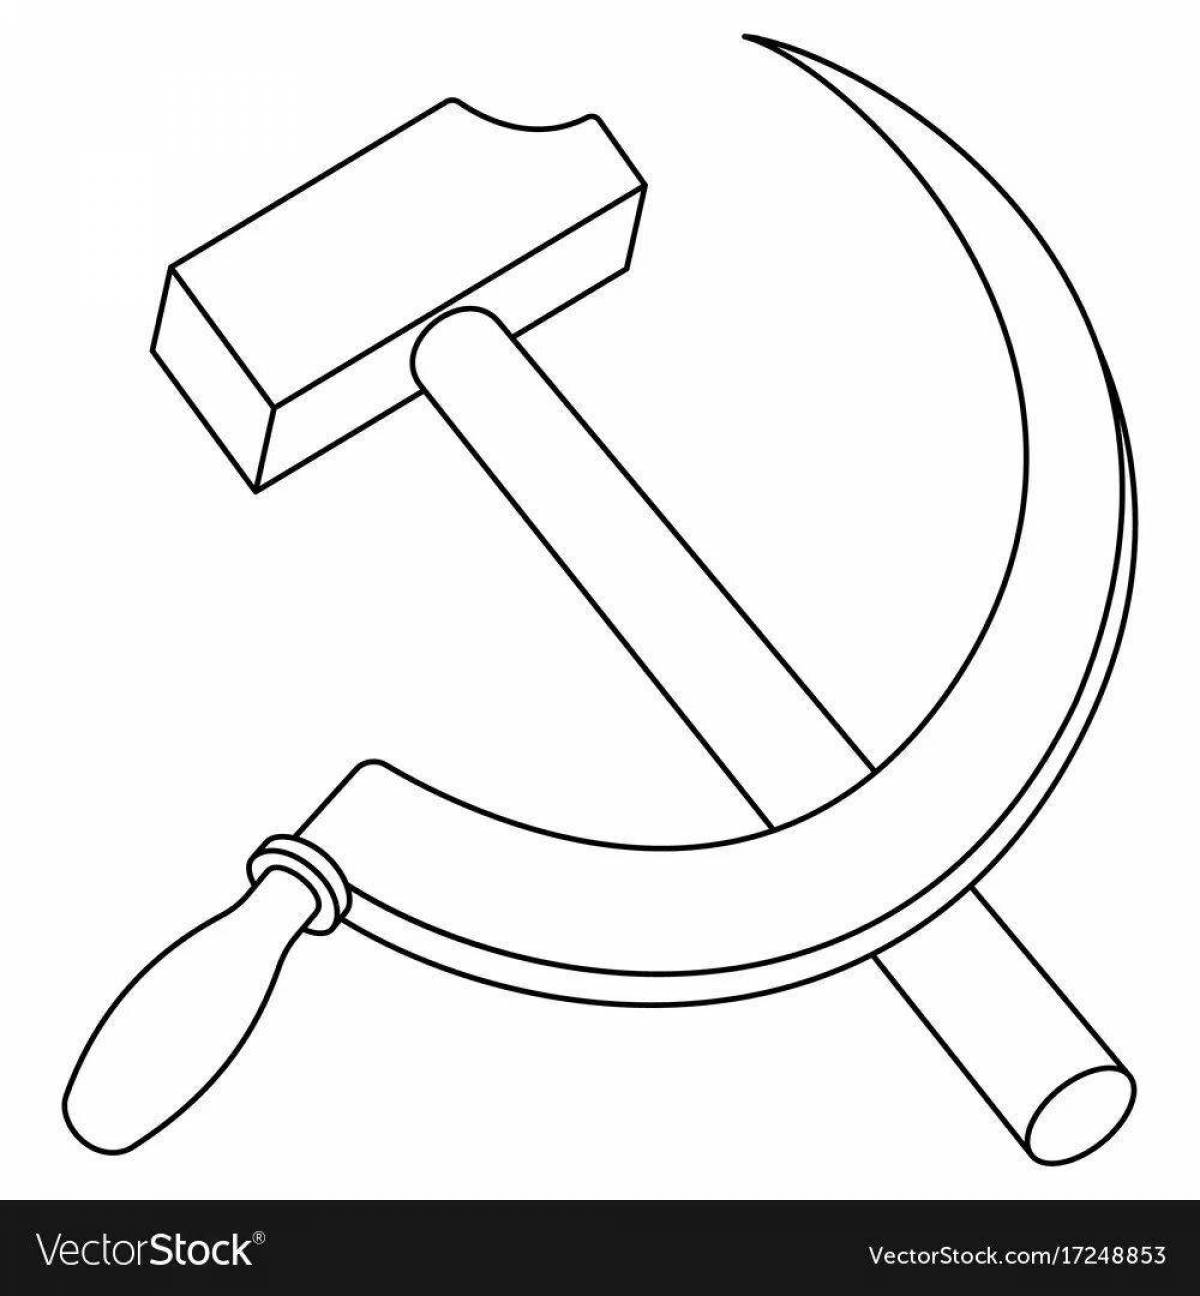 Unique hammer and sickle coloring page